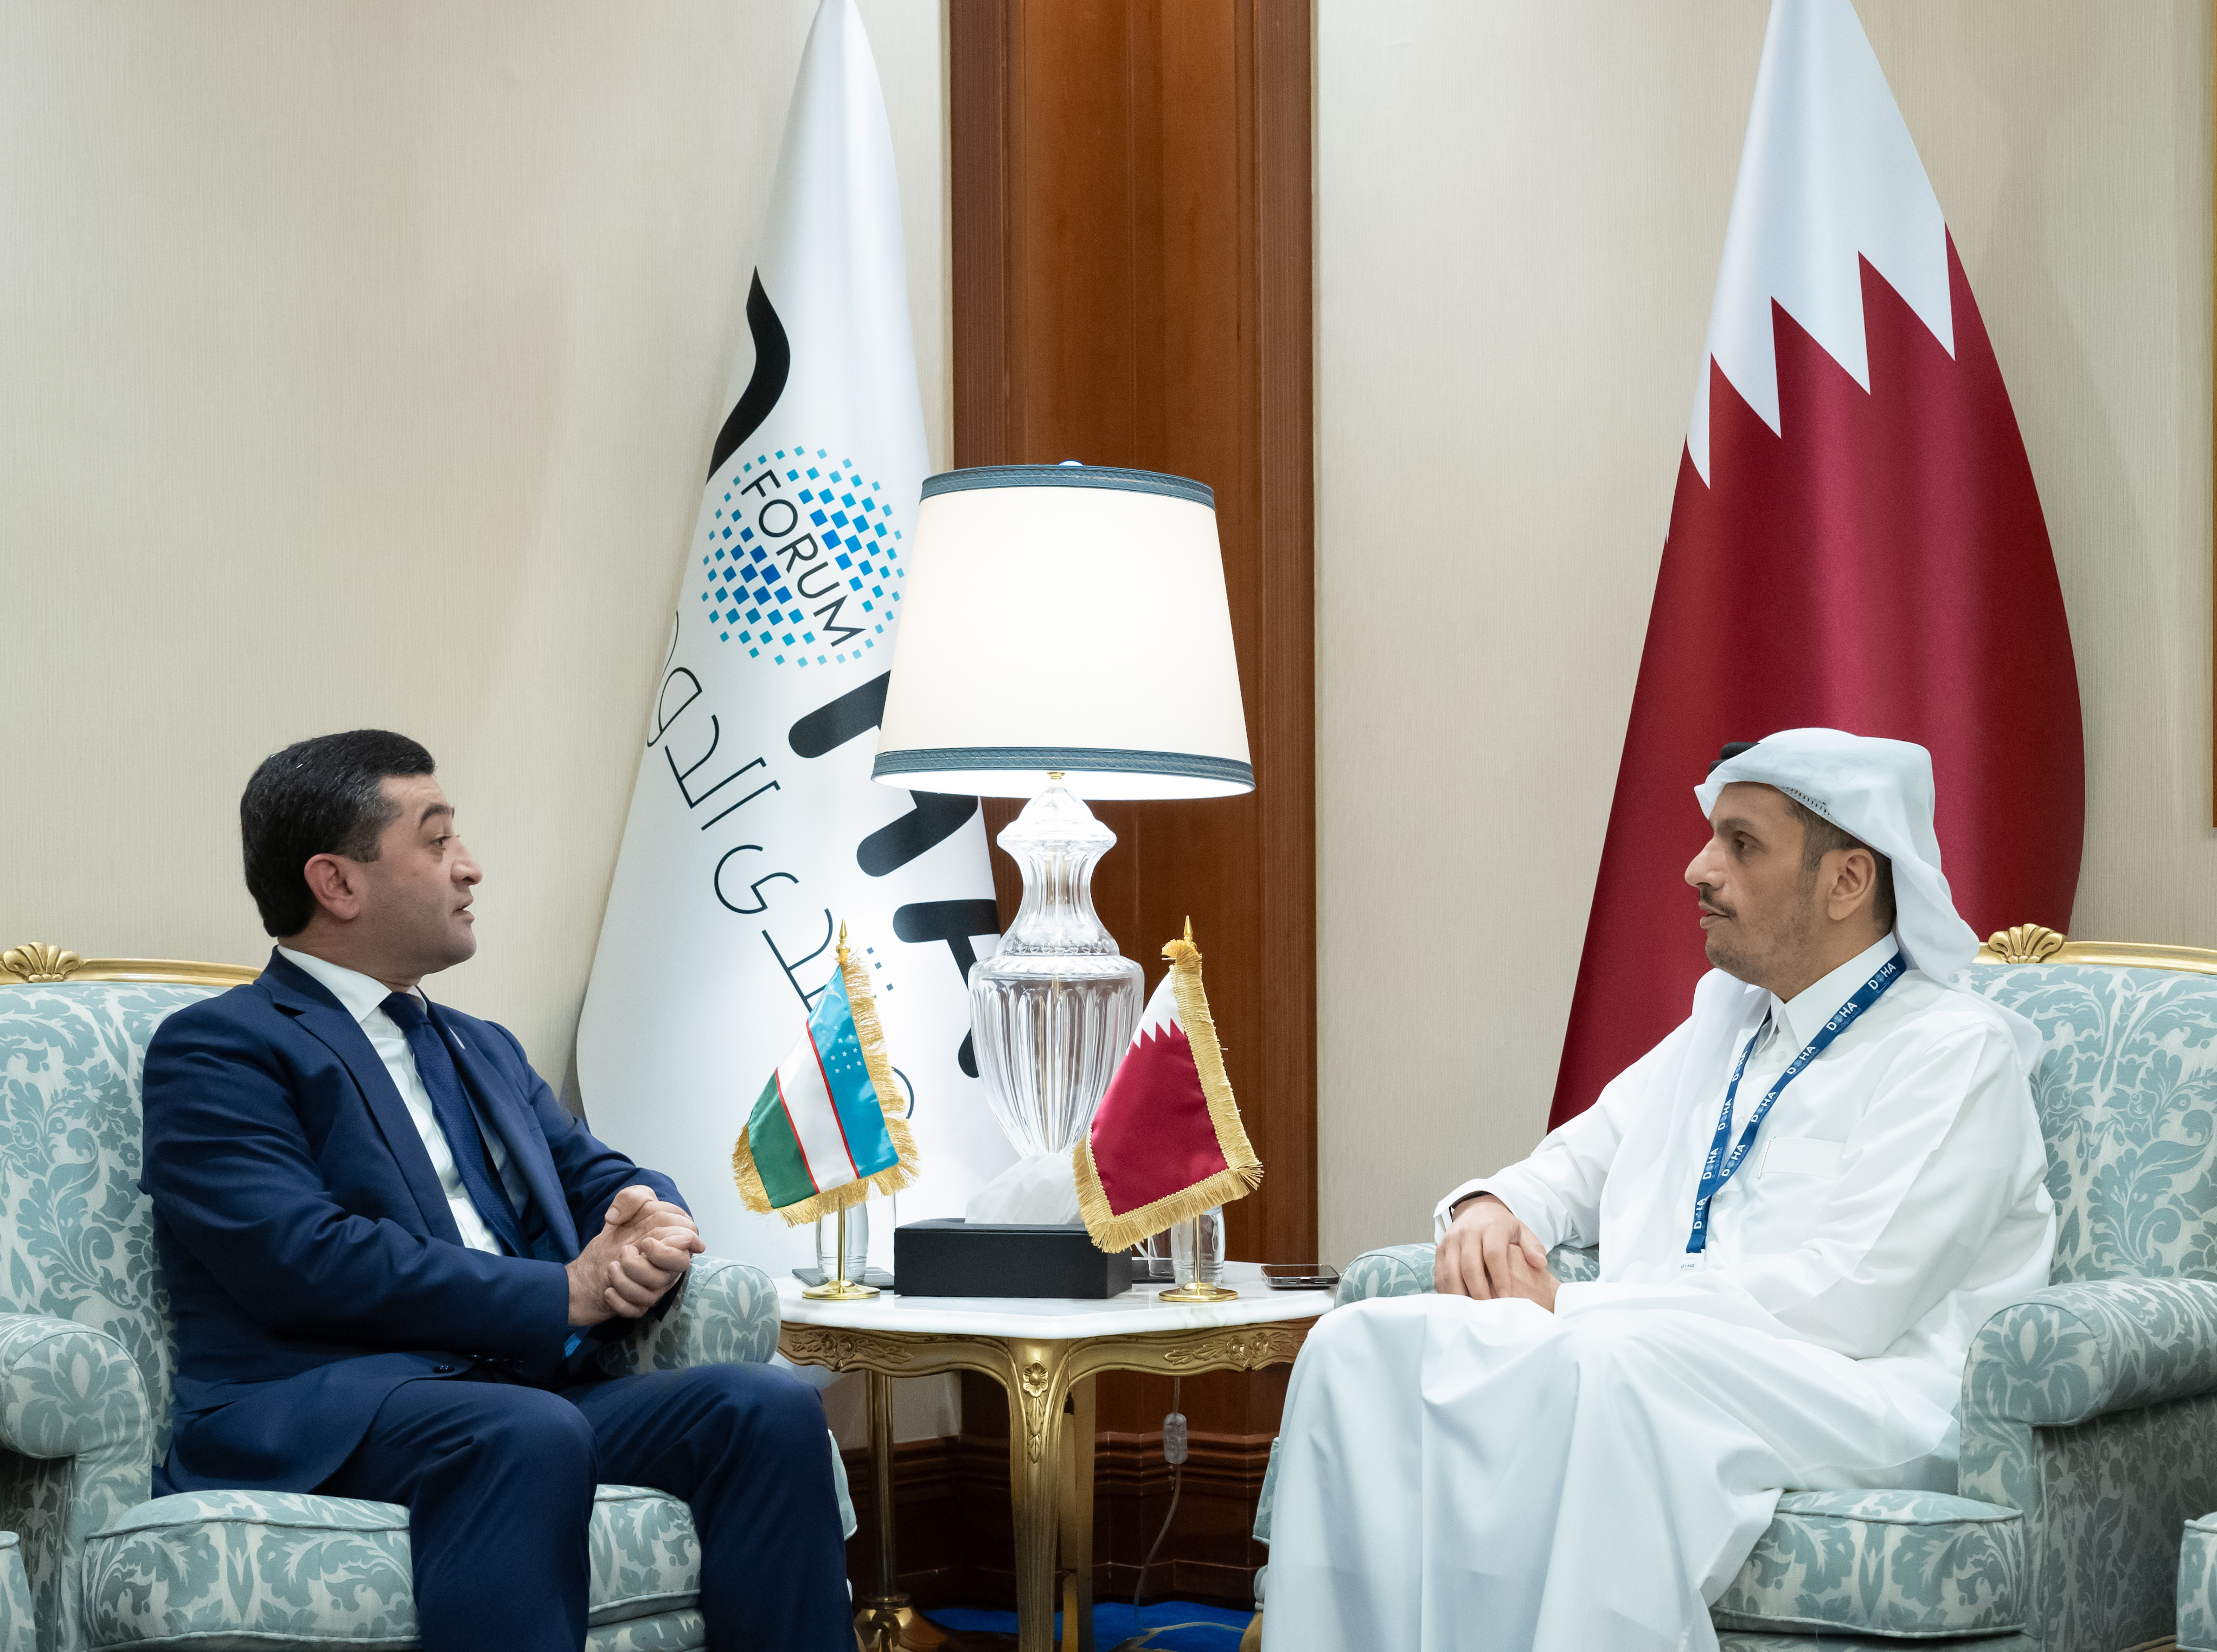 Prime Minister and Minister of Foreign Affairs Meets Officials on Margin of Doha Forum